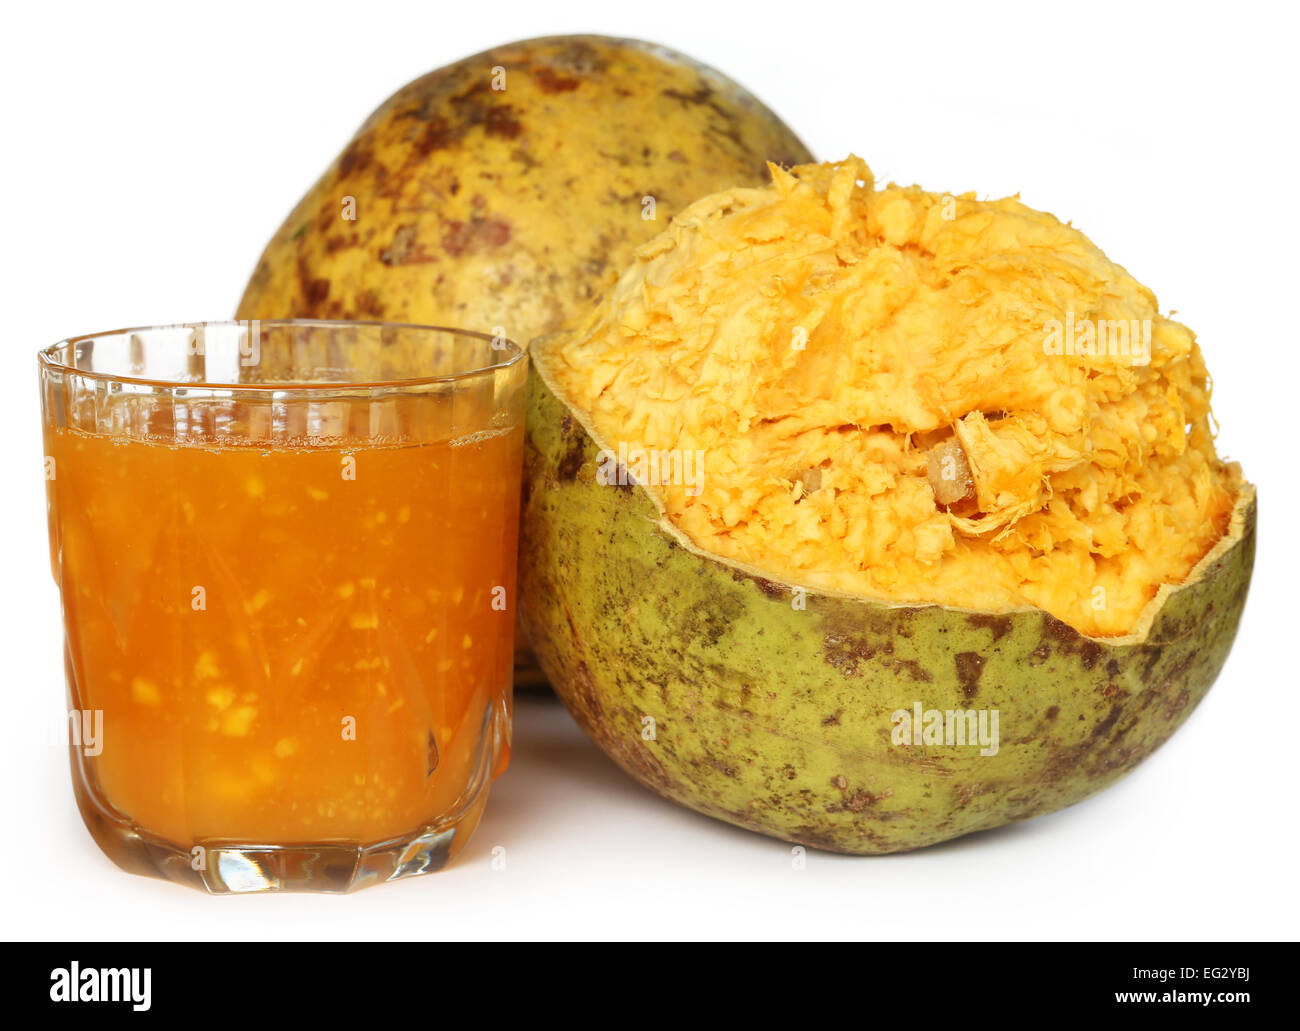 Medicinal Bael fruit with juice over white background Stock Photo